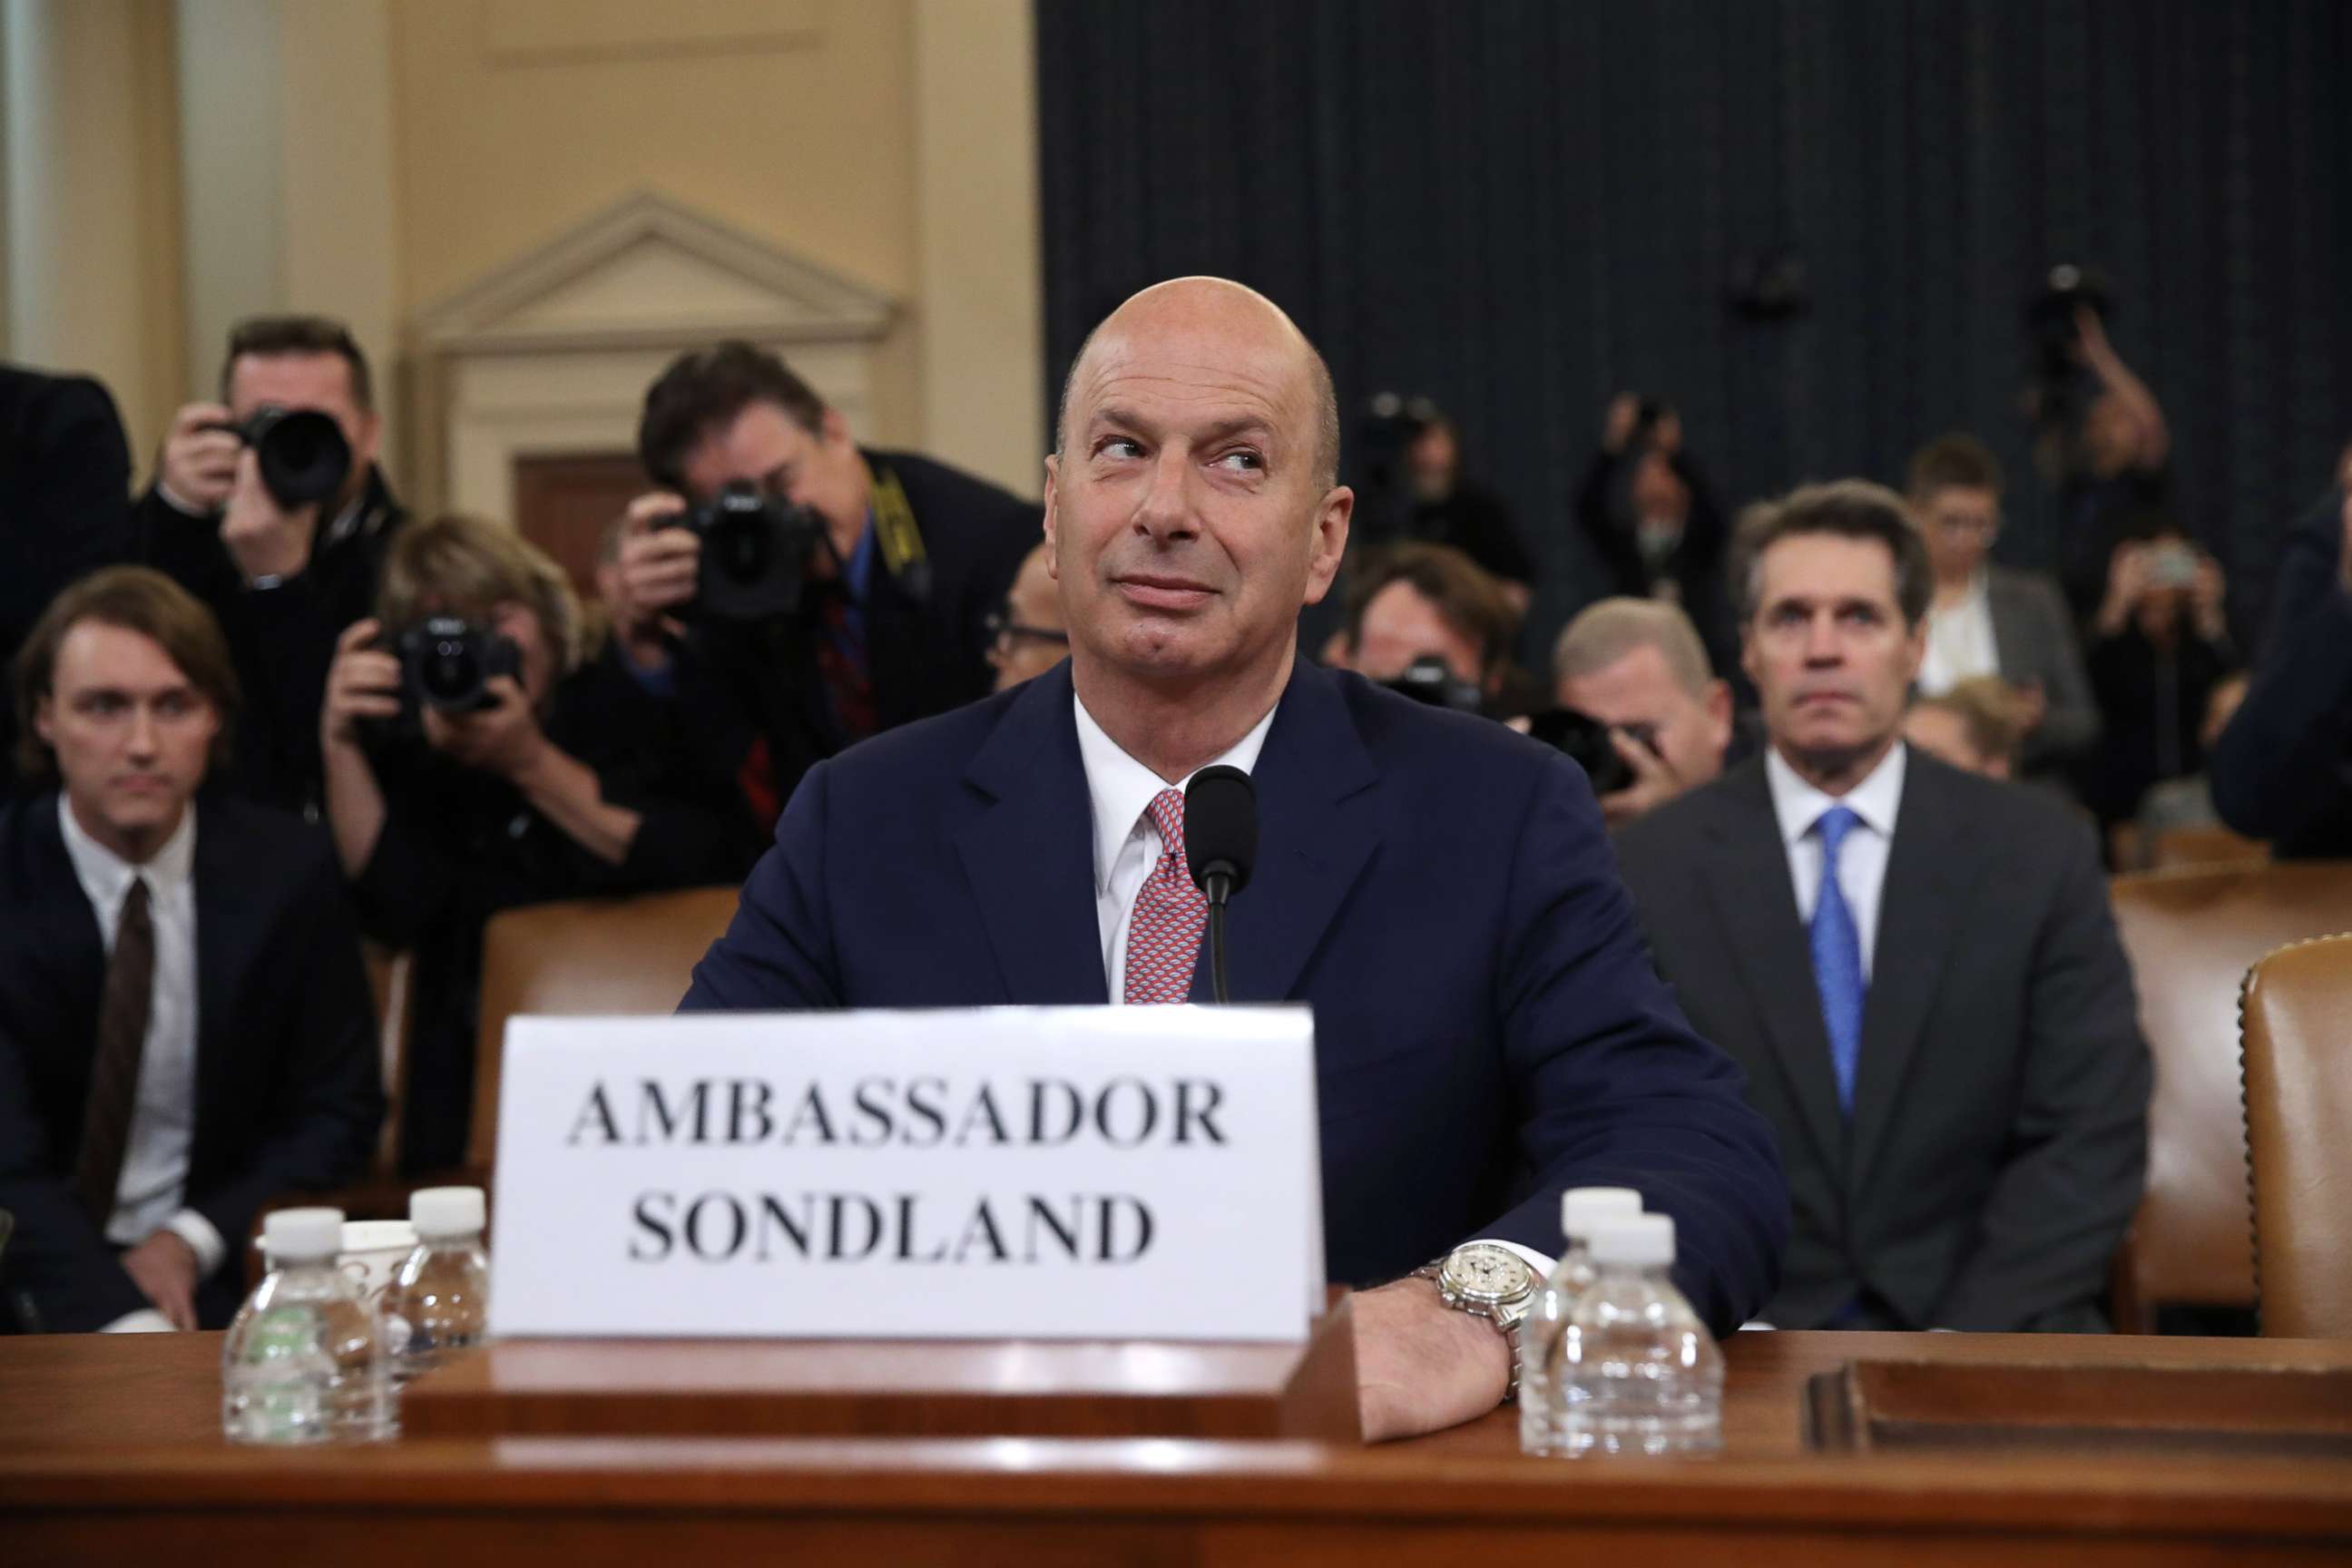 PHOTO: Gordon Sondland, the U.S ambassador to the European Union, waits to testify before the House Intelligence Committee during an impeachment hearing on Capitol Hill, Nov. 20, 2019 in Washington, D.C.